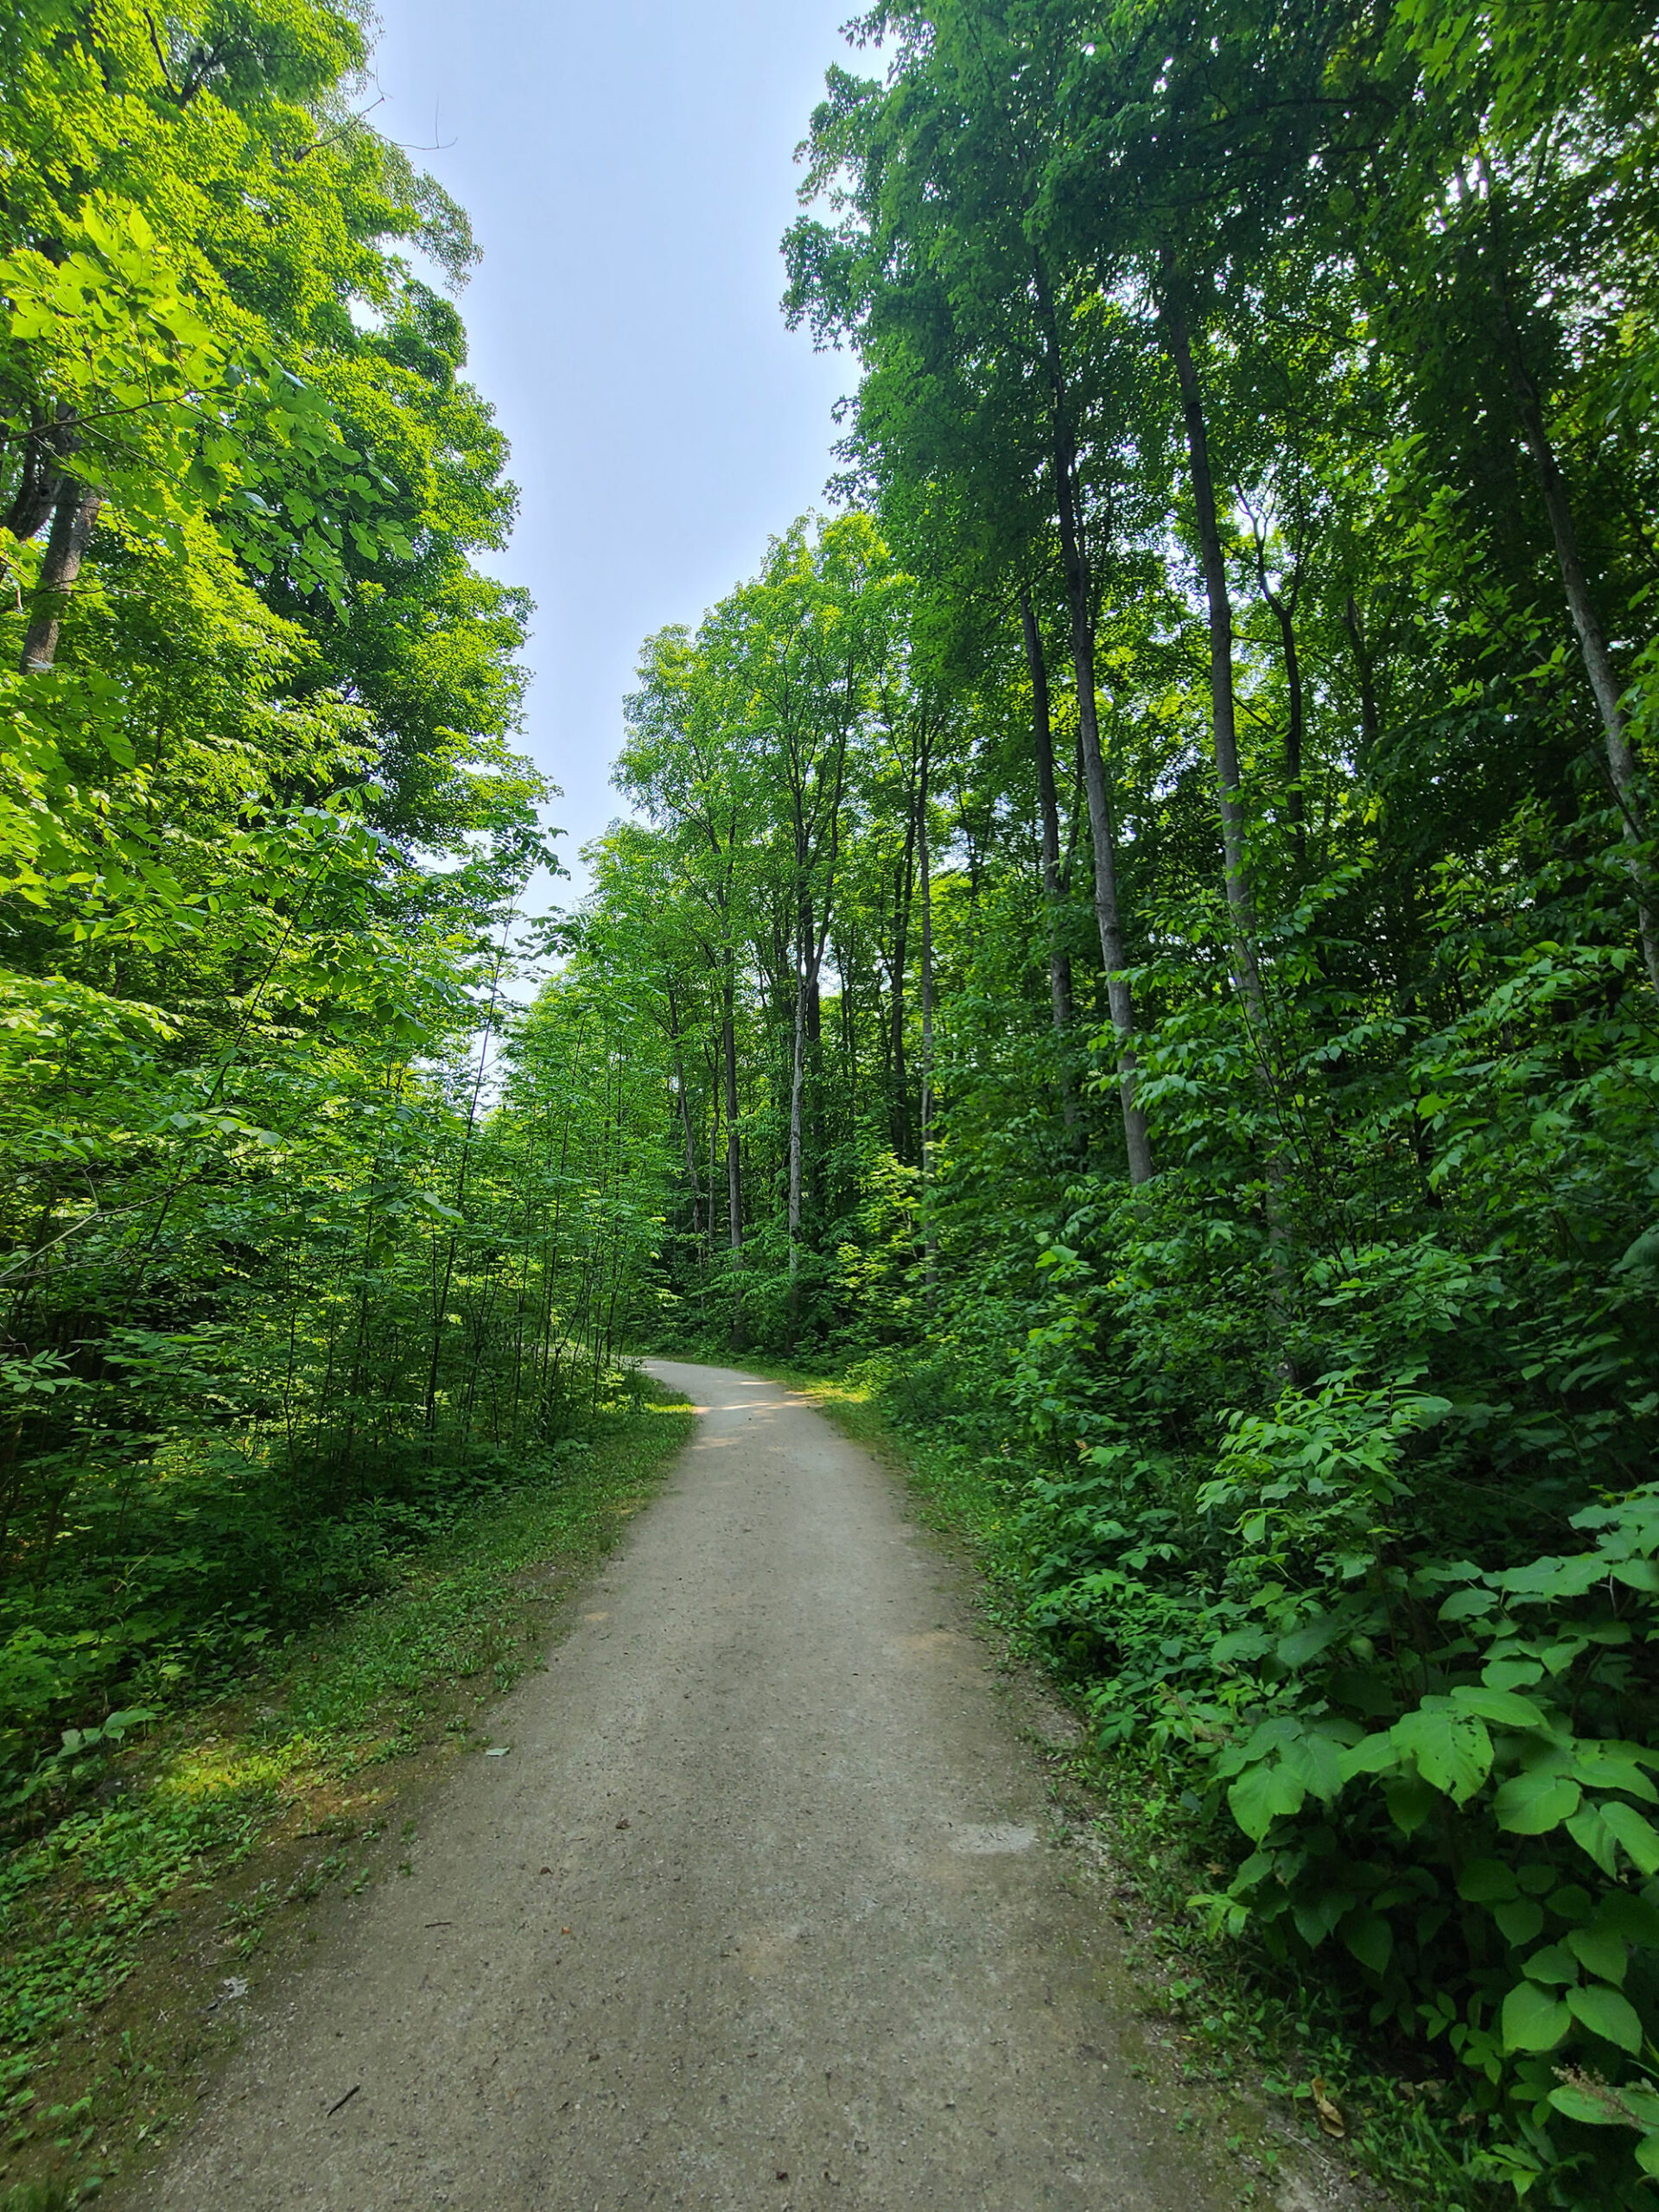 A hard packed trail runs through a wooded area in Meaford, Ontario,